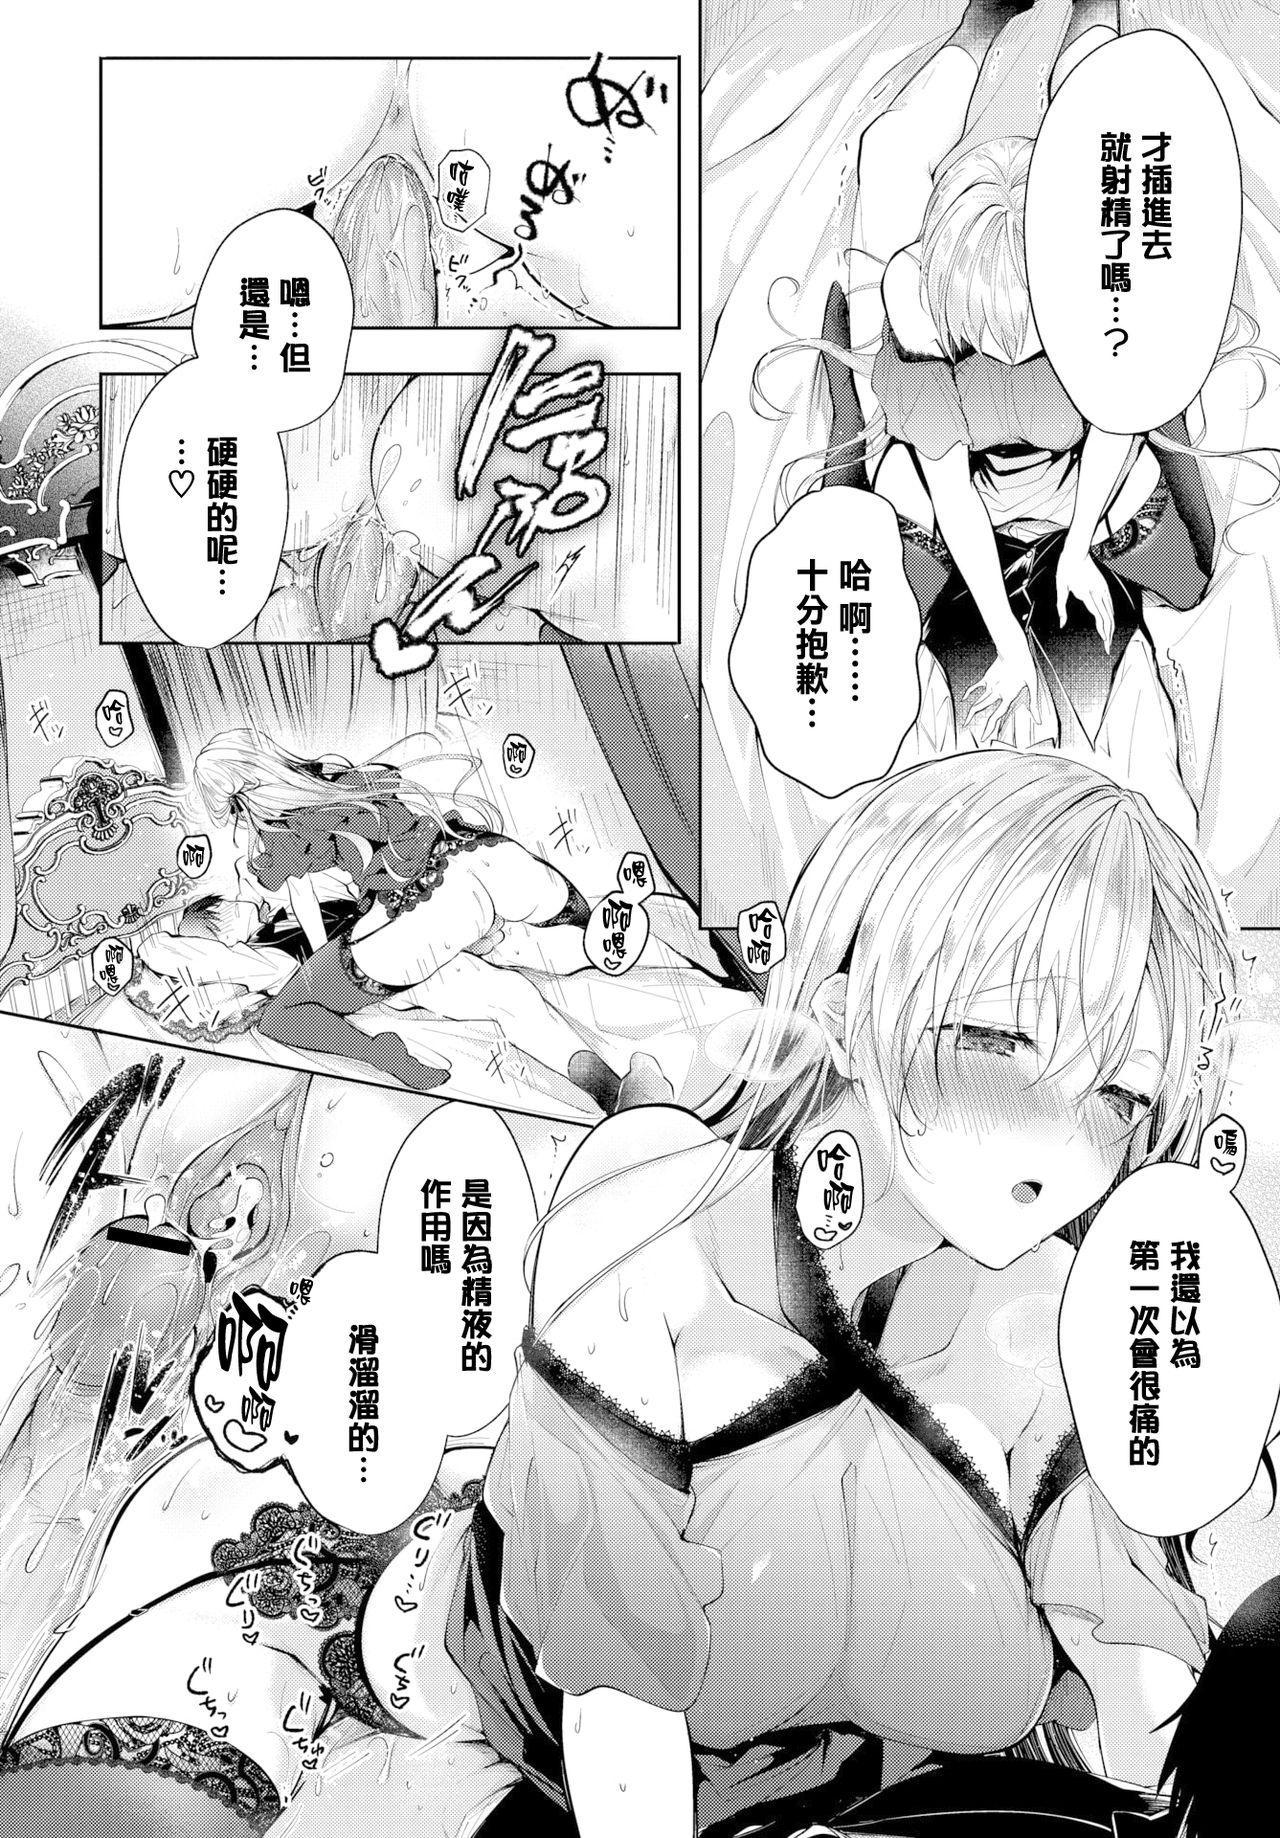 Pounded Ai no Uta - LOVE SONG Suck - Page 10